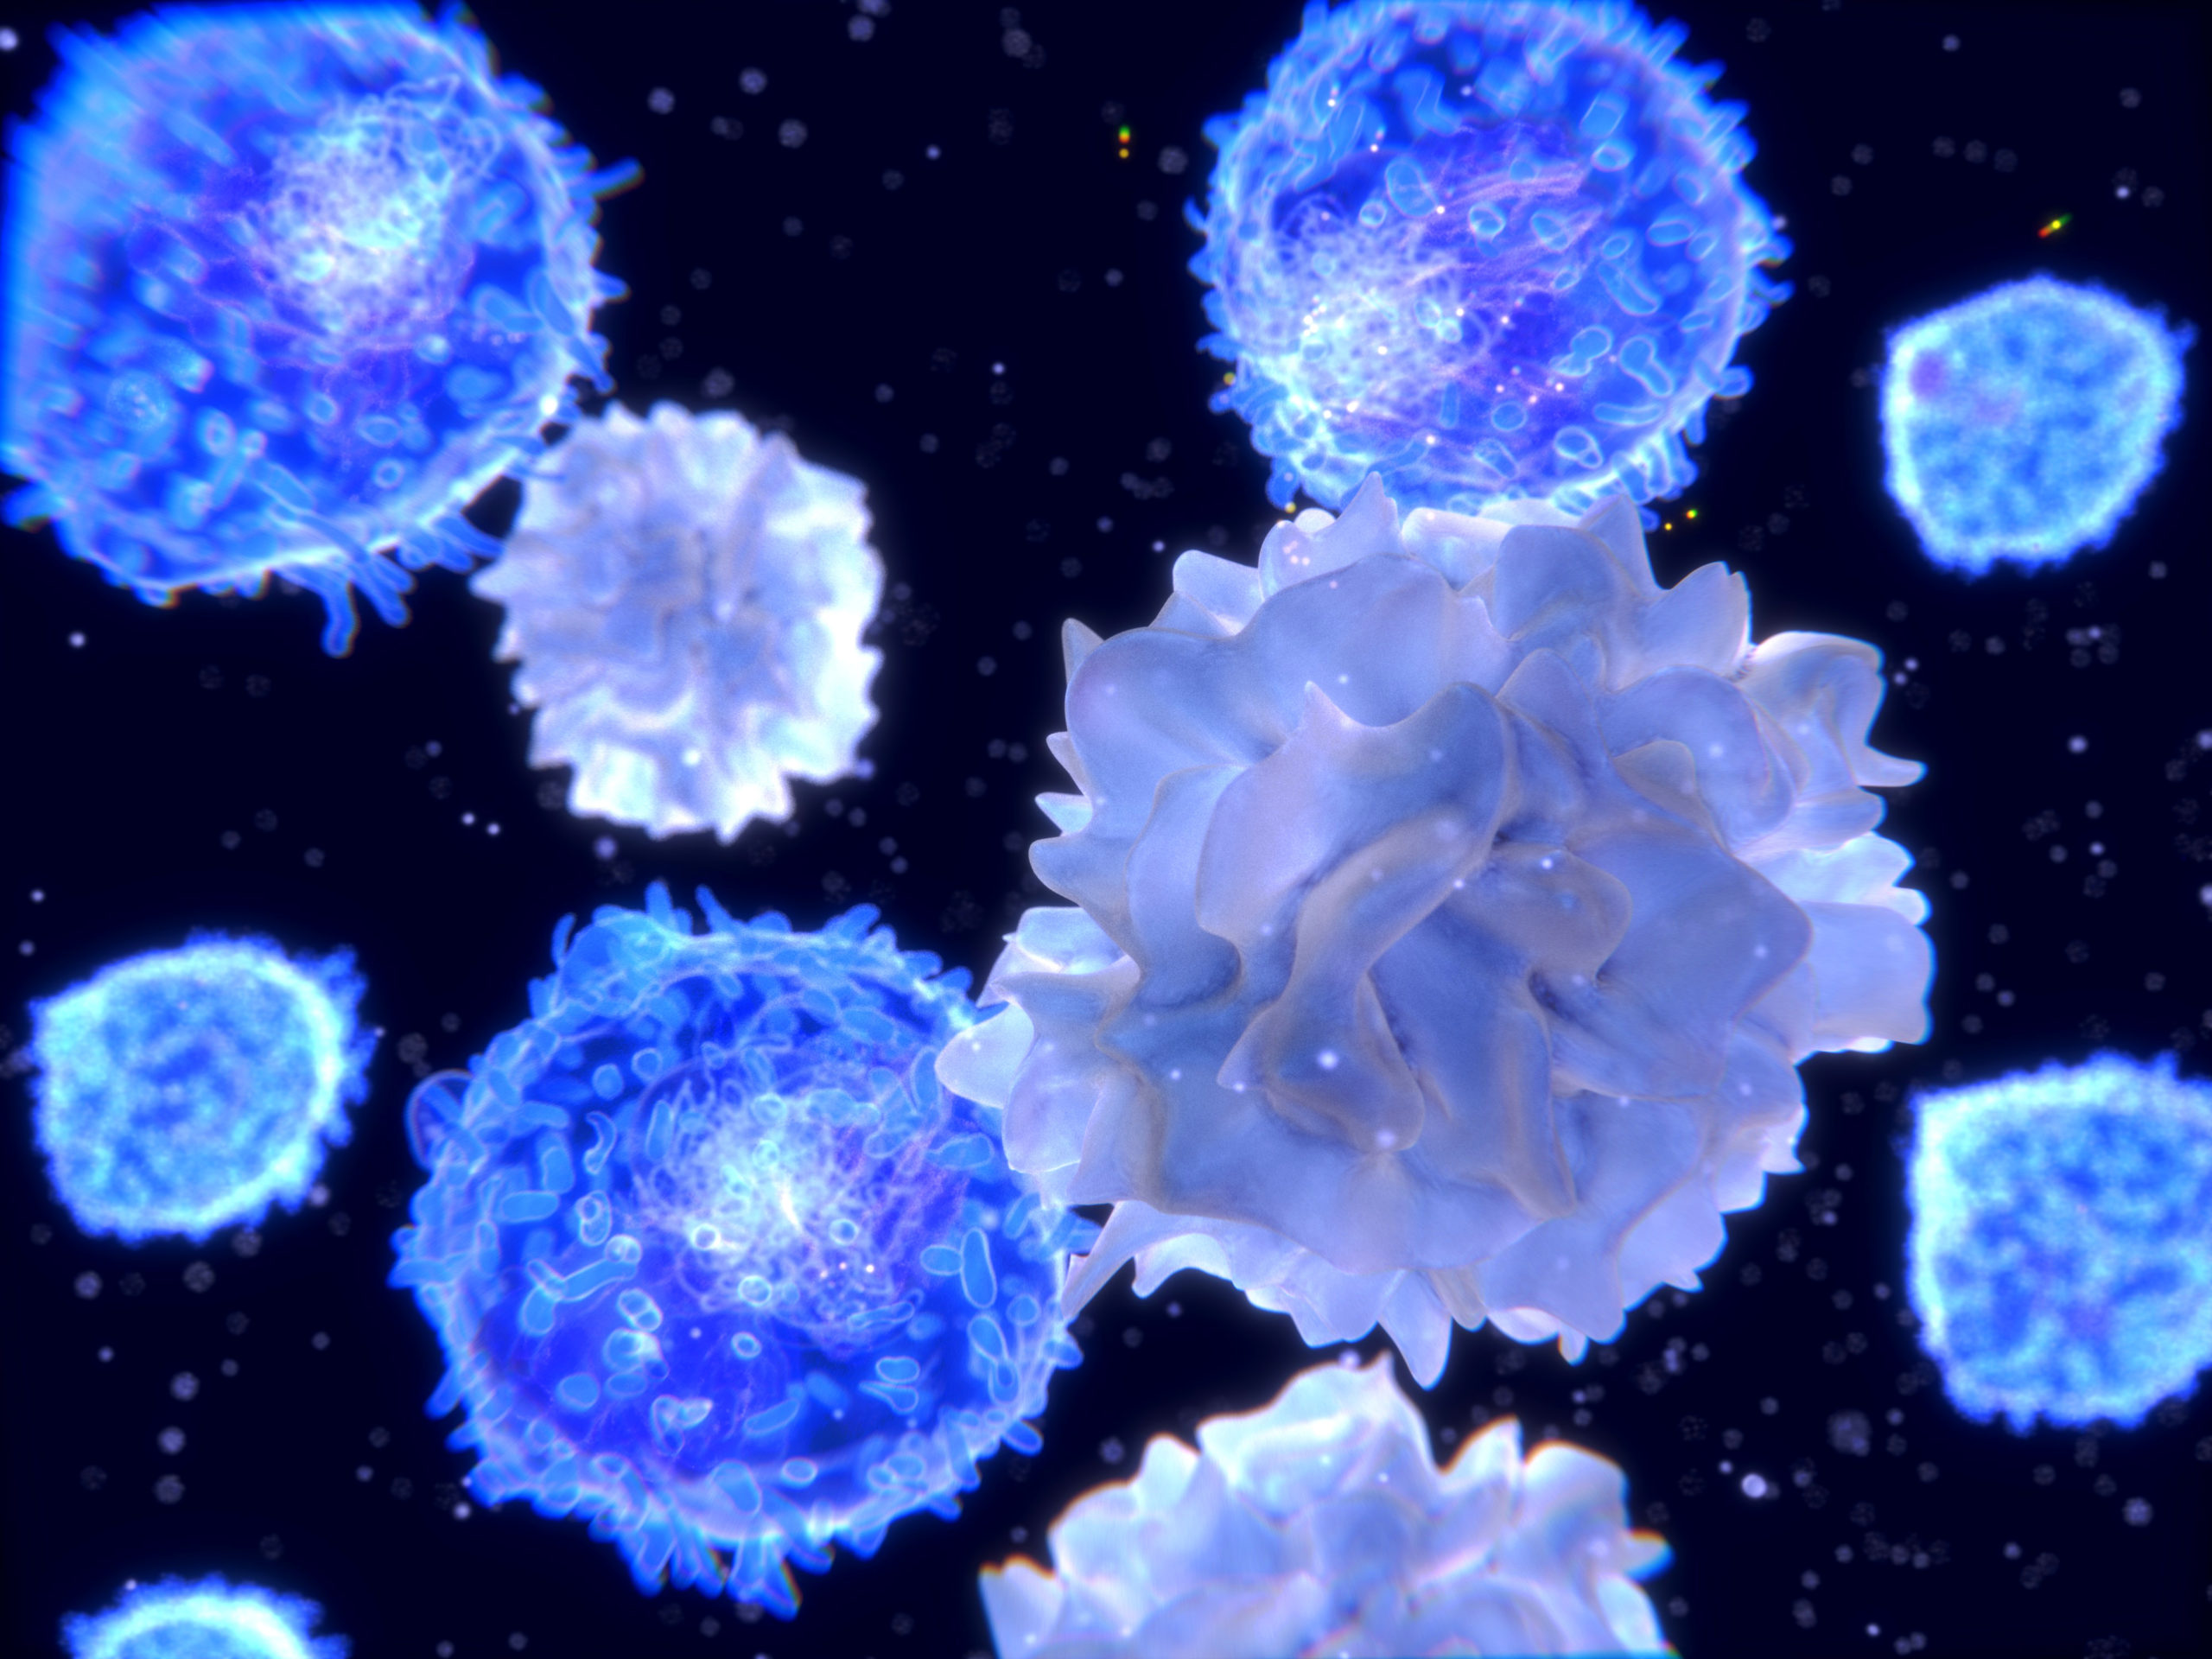 Evaluating T-Cell Large Granular Lymphocytes in ITP Population